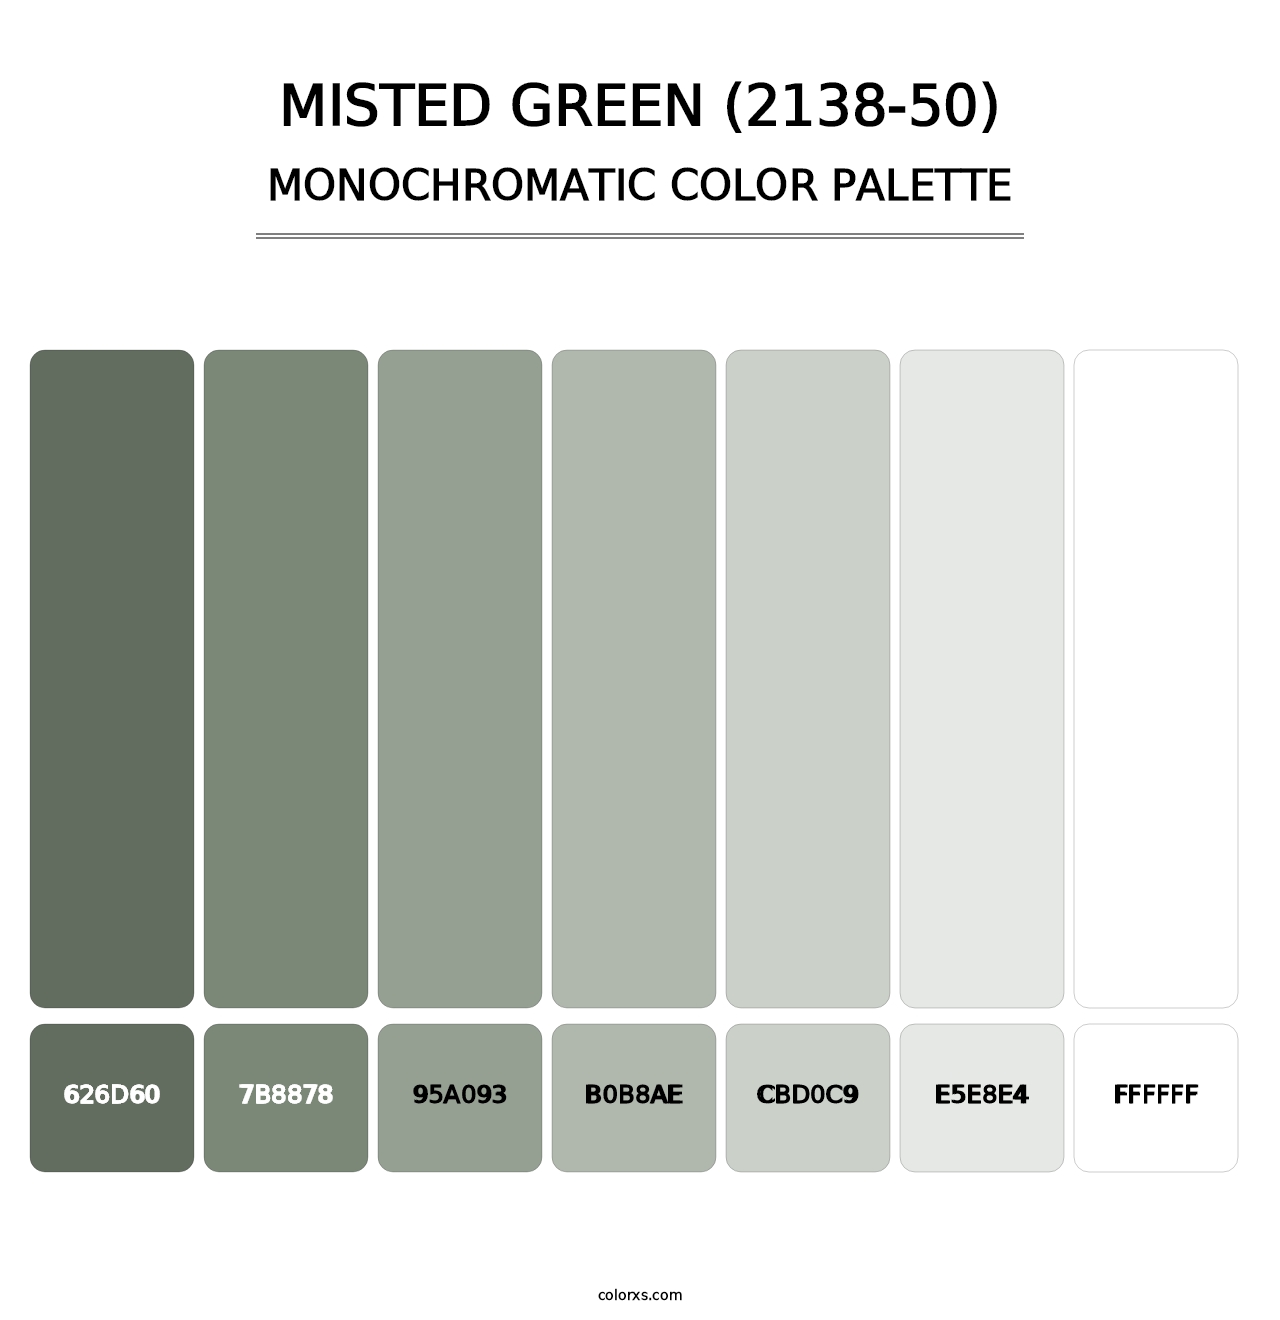 Misted Green (2138-50) - Monochromatic Color Palette